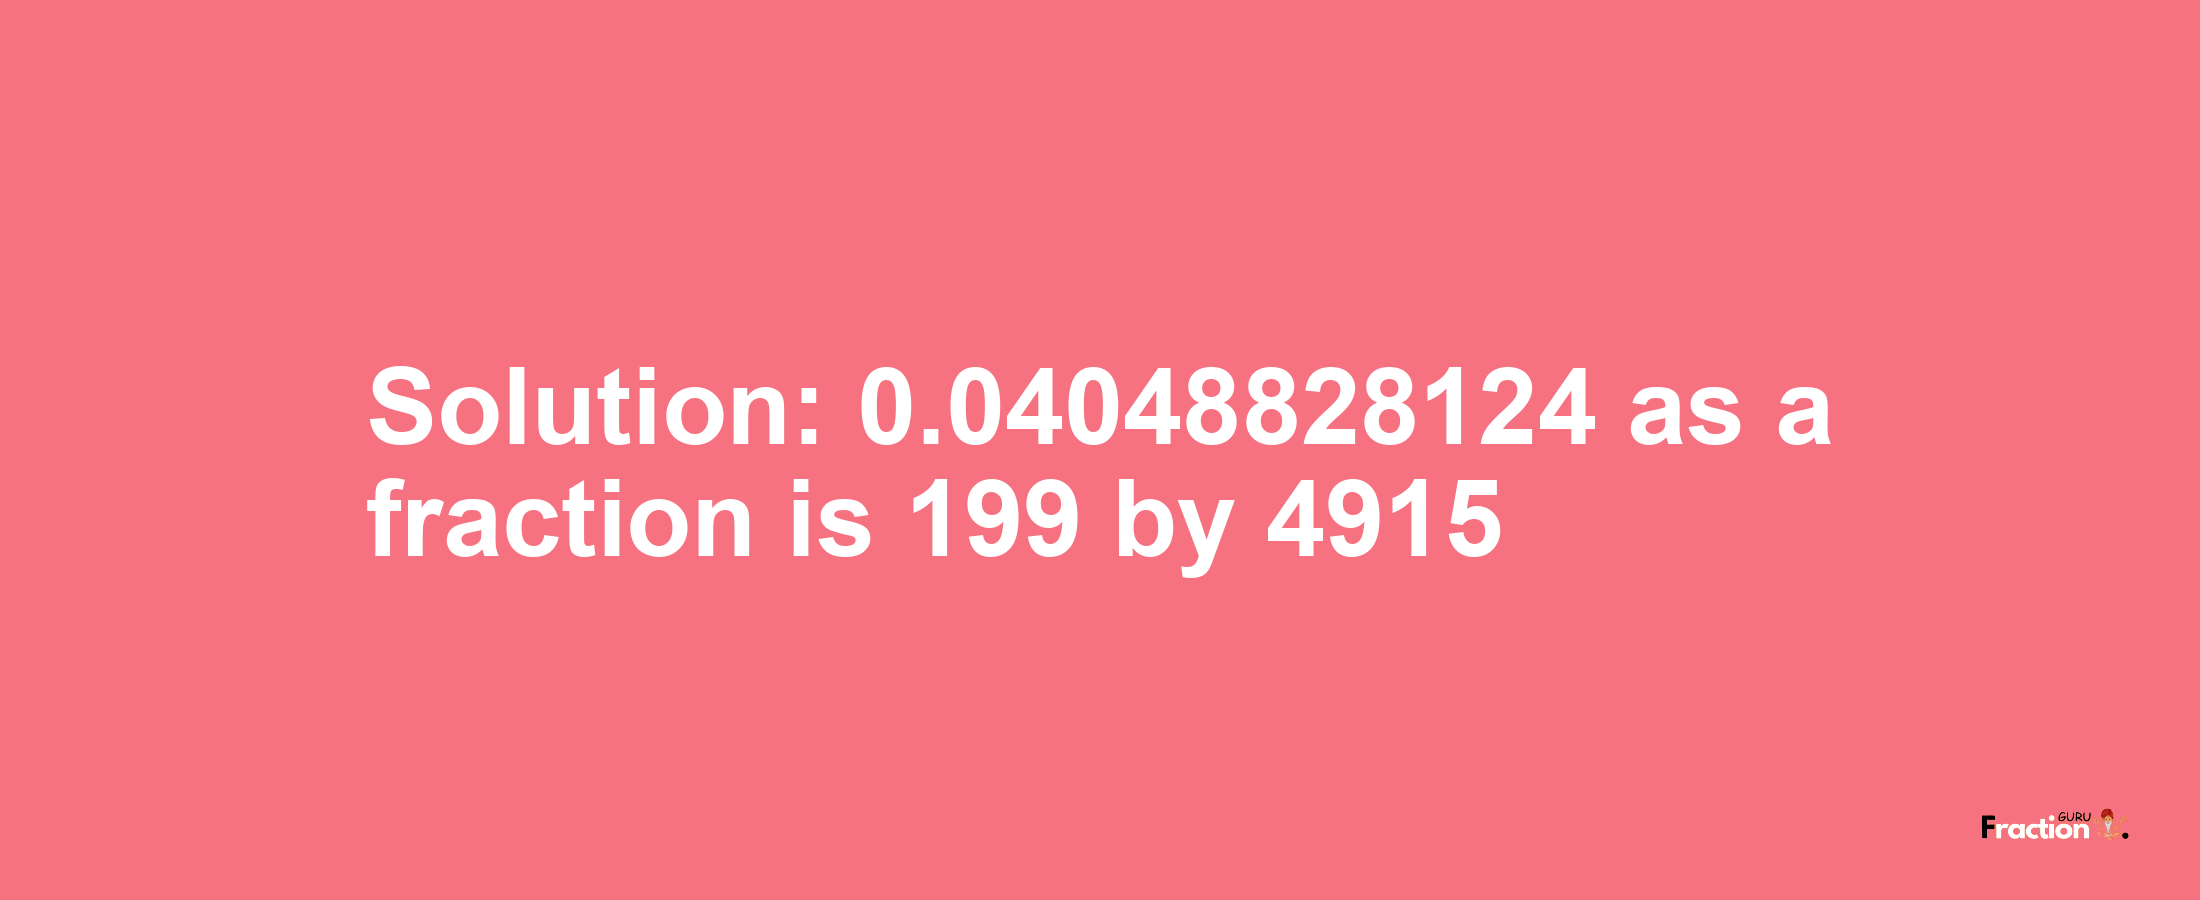 Solution:0.04048828124 as a fraction is 199/4915